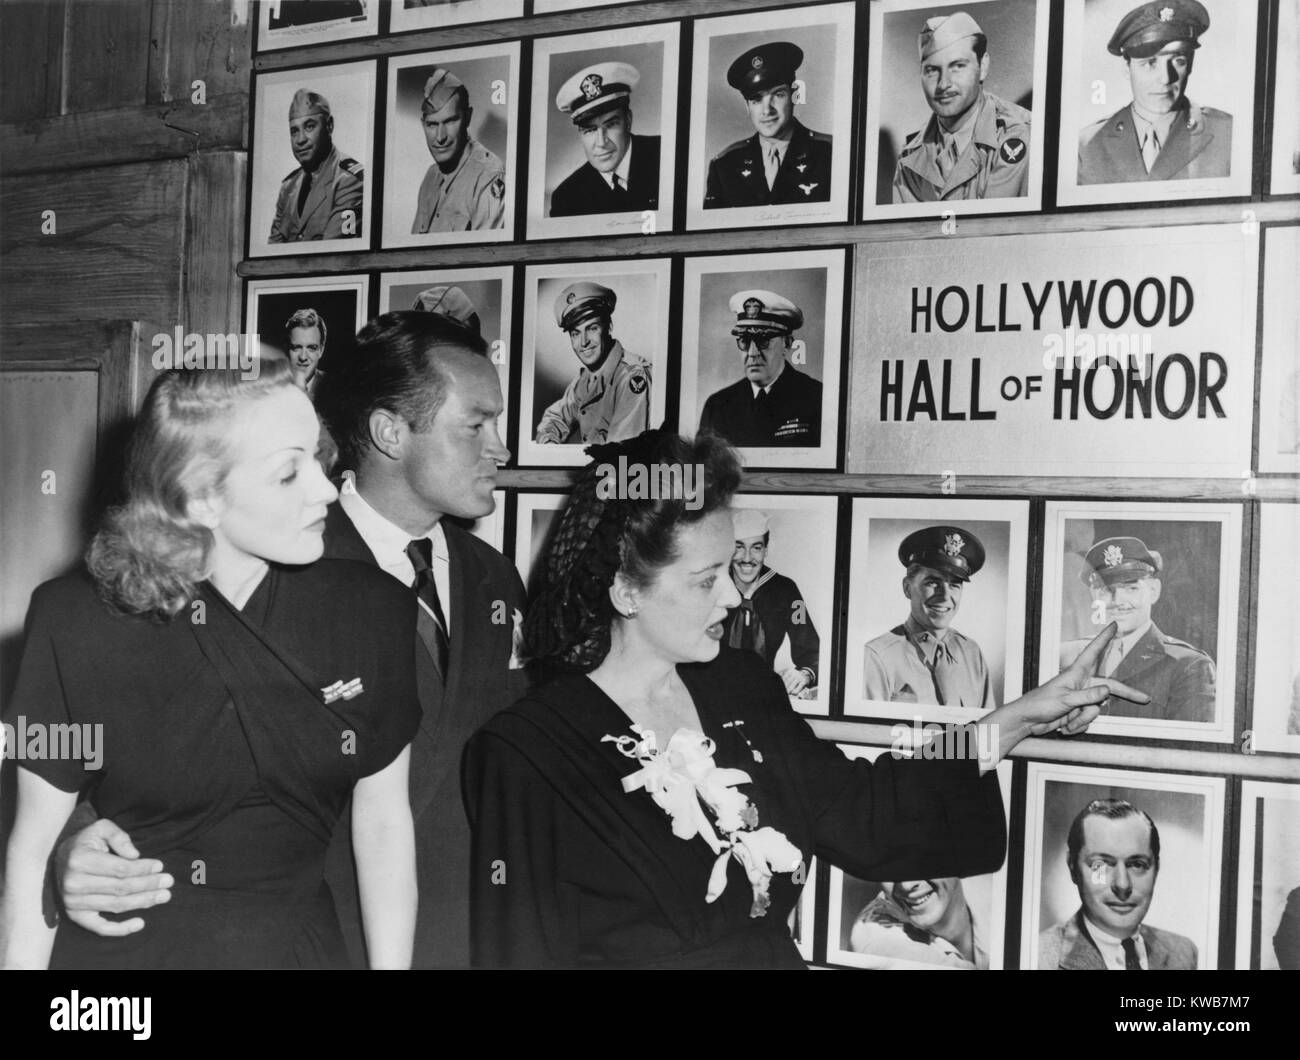 Wall of Honor in the Hollywood Canteen for servicemen during World War 2. Marlene Dietrich, Bob Hope, and  Bette Davis were very active 'war workers' entertaining troops at home and in battle zones. Actors represented on the Wall of Honer include: Clark Gable, Ronald Reagan, Robert Montgomery, Cesar Romero, John Ford, 1943.Van Heflin, Alan Ladd, Robert Cummings and George Montgomery. (BSLOC 2014 10 241) Stock Photo